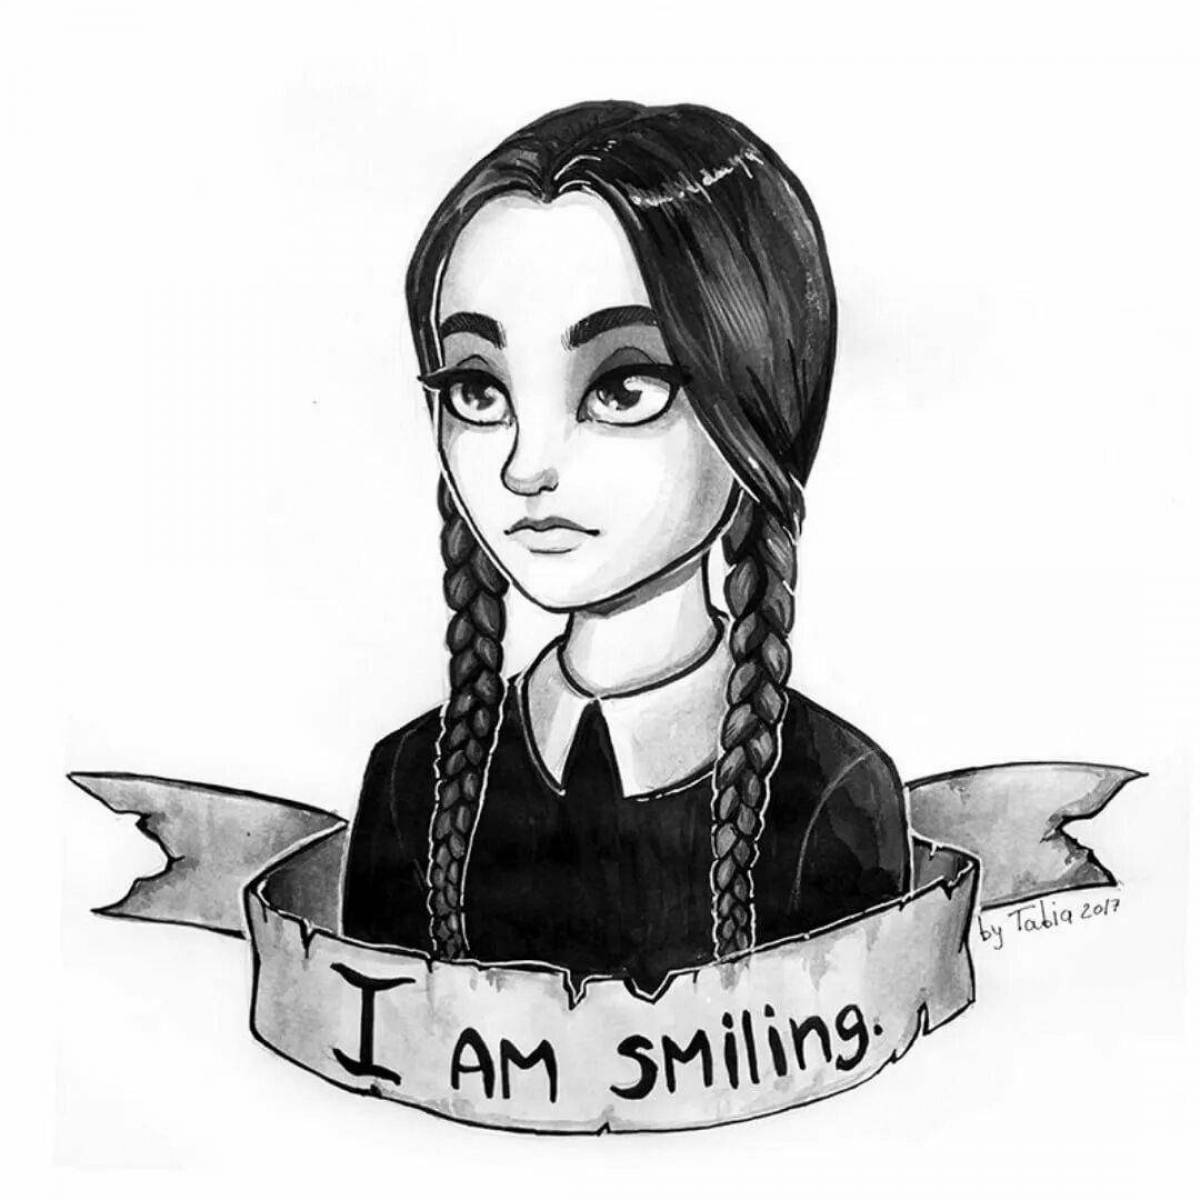 Wednesday Addams from series #3